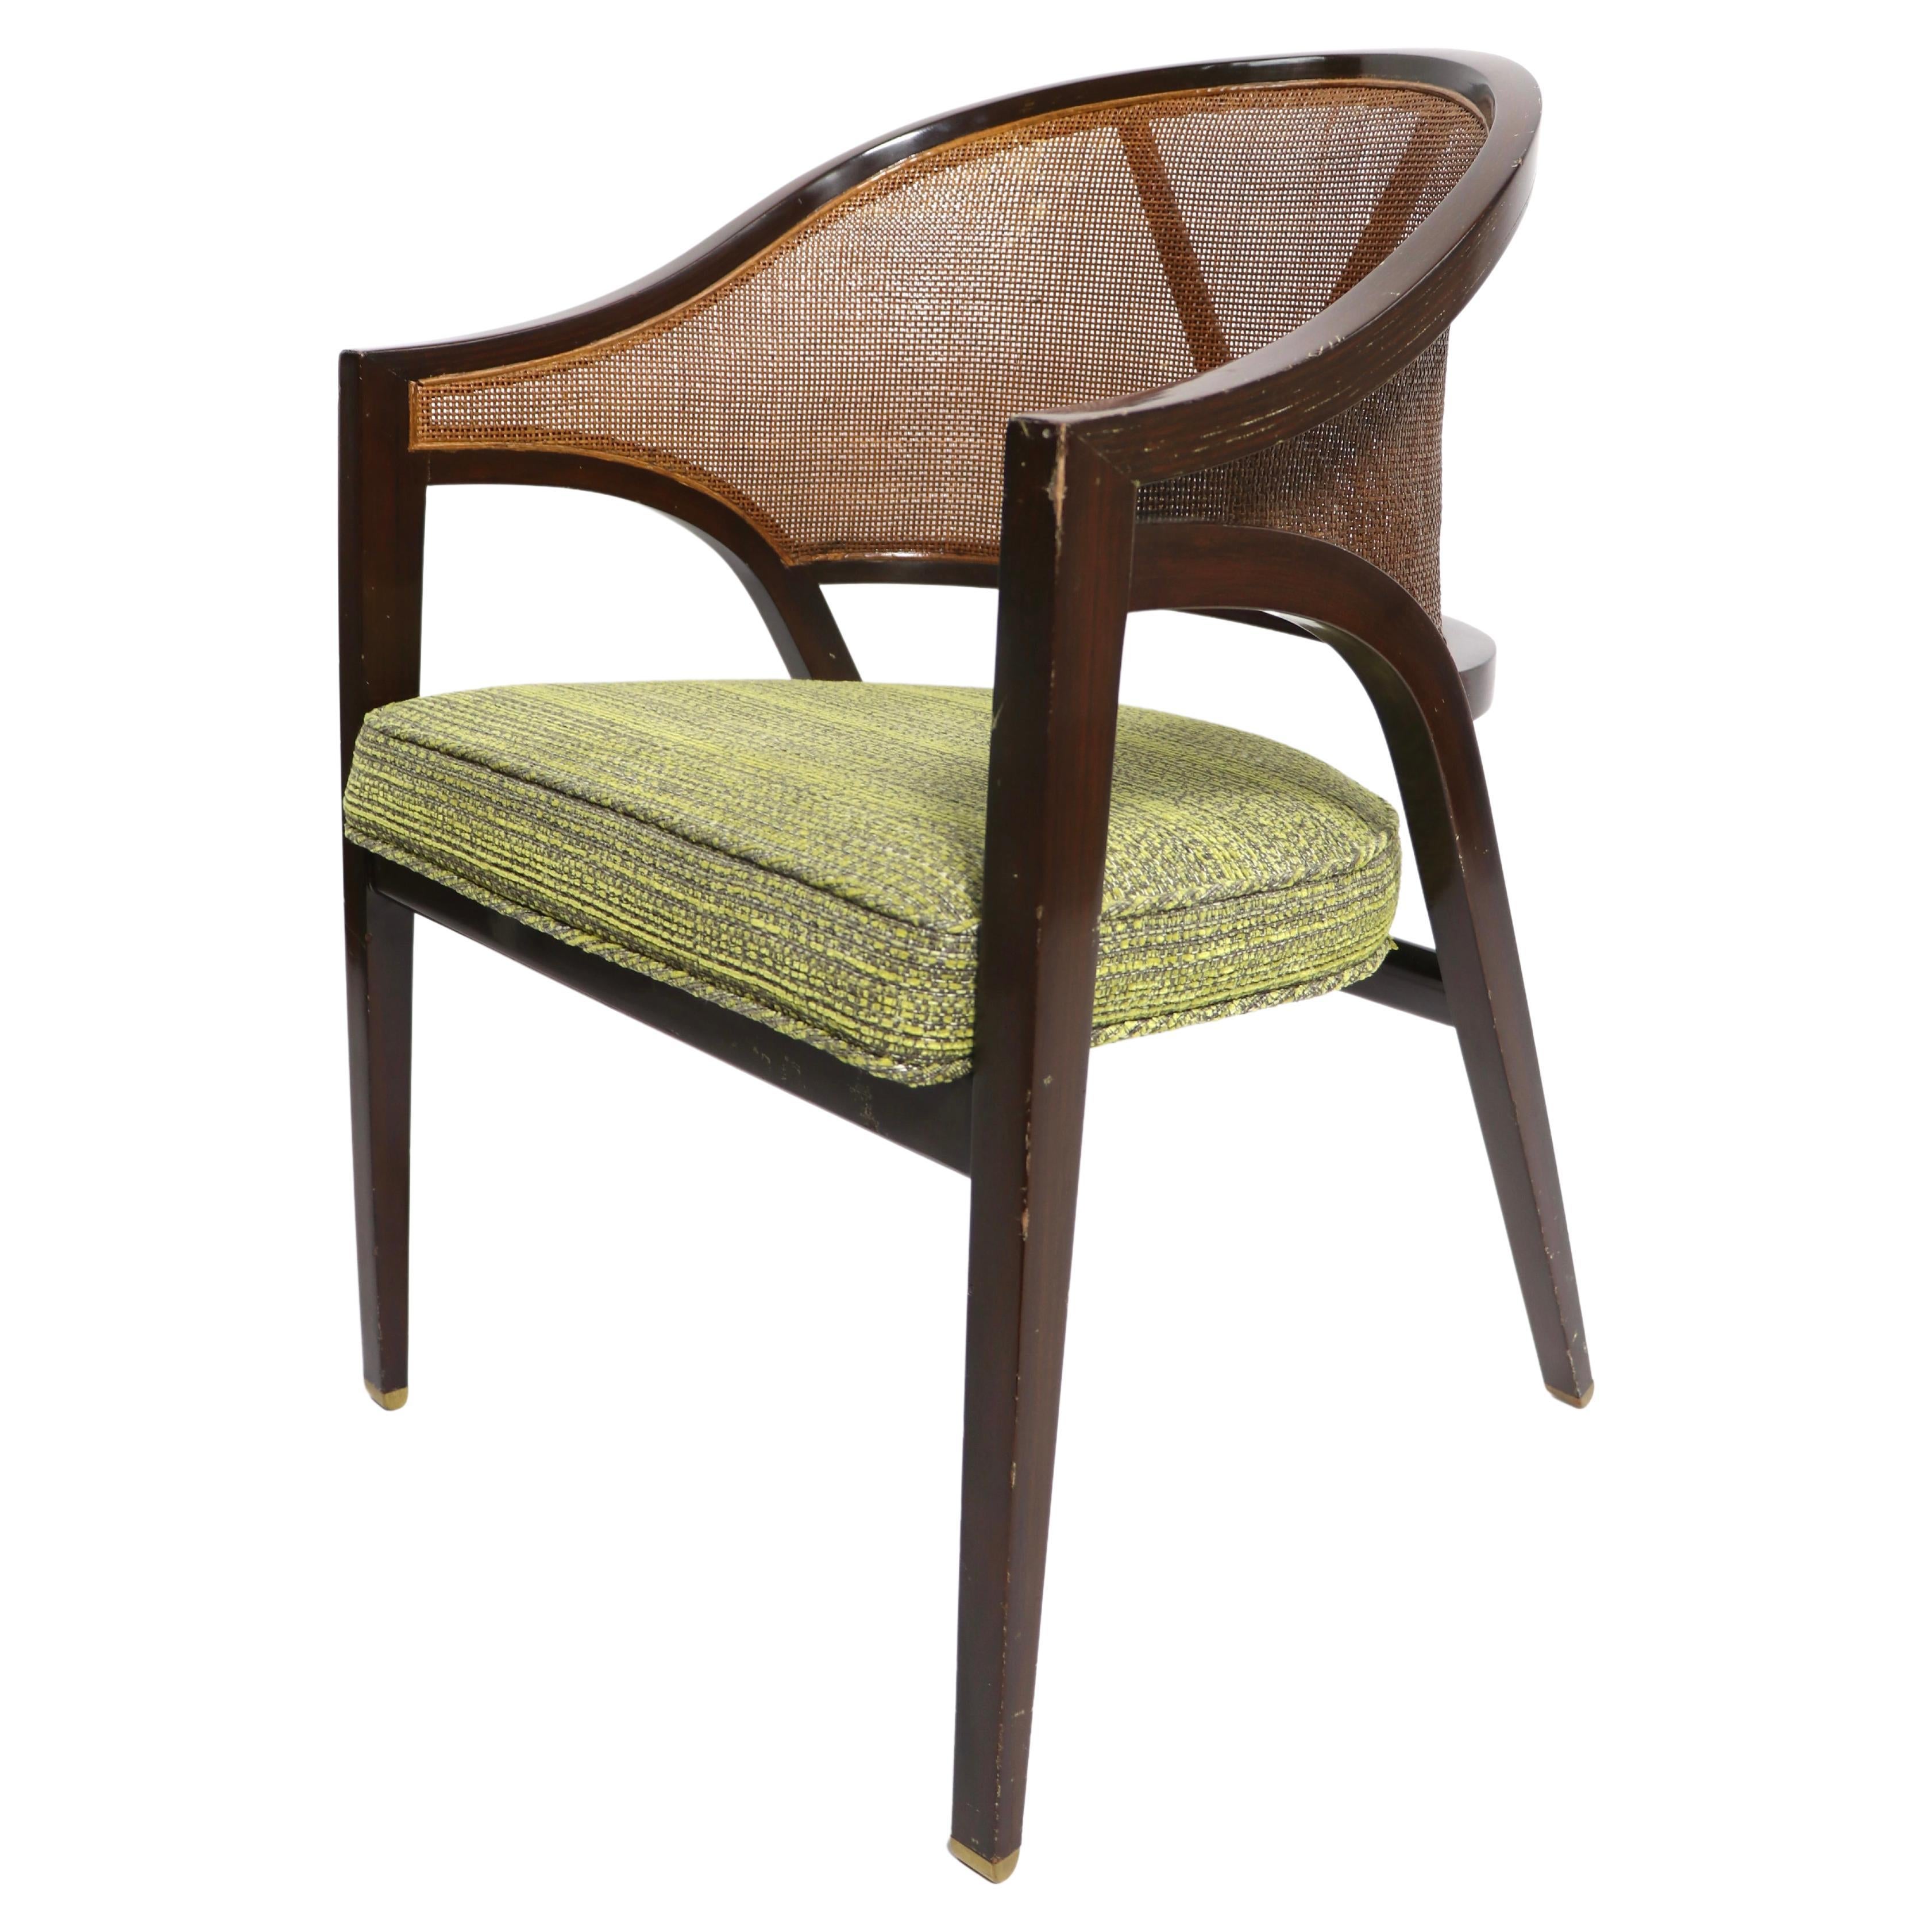 Elegant, sophisticated and chic dining chair, designed by Wormley for Dunbar. The chair features a sculpted walnut frame, caned back and upholstered seat. This example is in good condition, structurally sound and sturdy, it shows cosmetic wear,